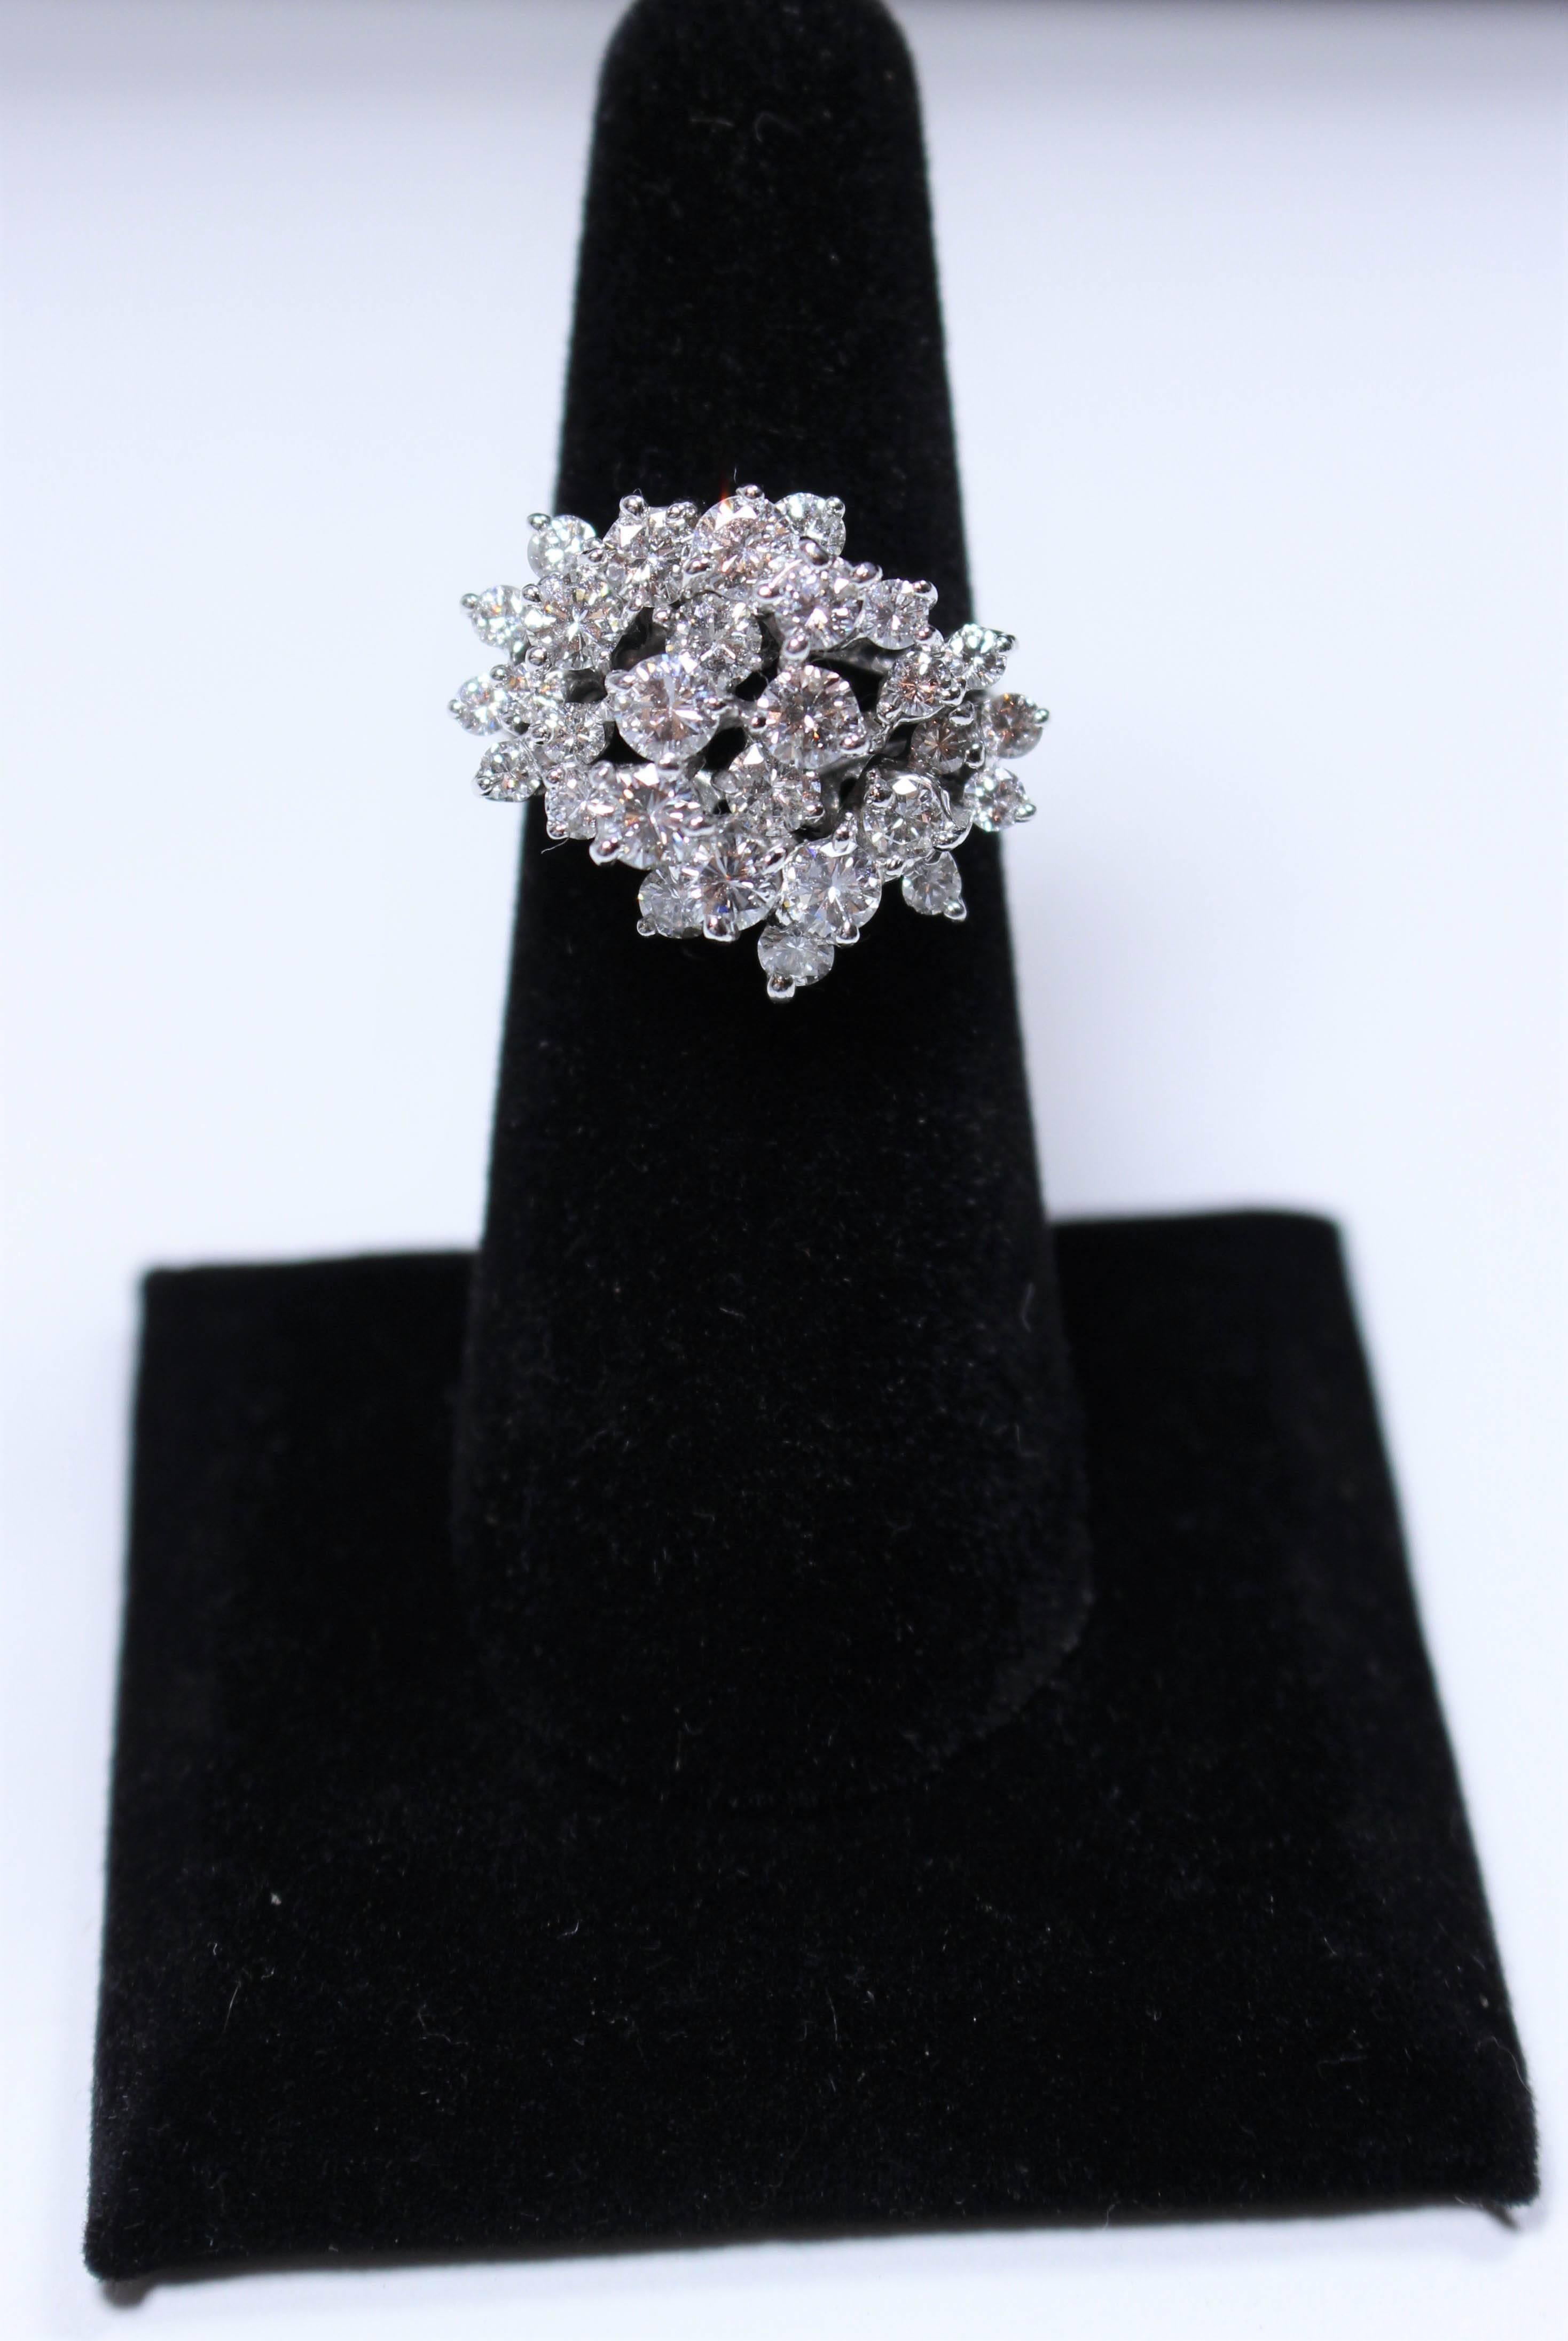 This ring is composed of 18kt white gold and features a stunning cascading diamond design. Size 7 easily sizable.

Please feel free to ask any questions you may have, we are happy to assist. 

Specs:
18 KT White Gold
Diamonds: 
30- Round Cut